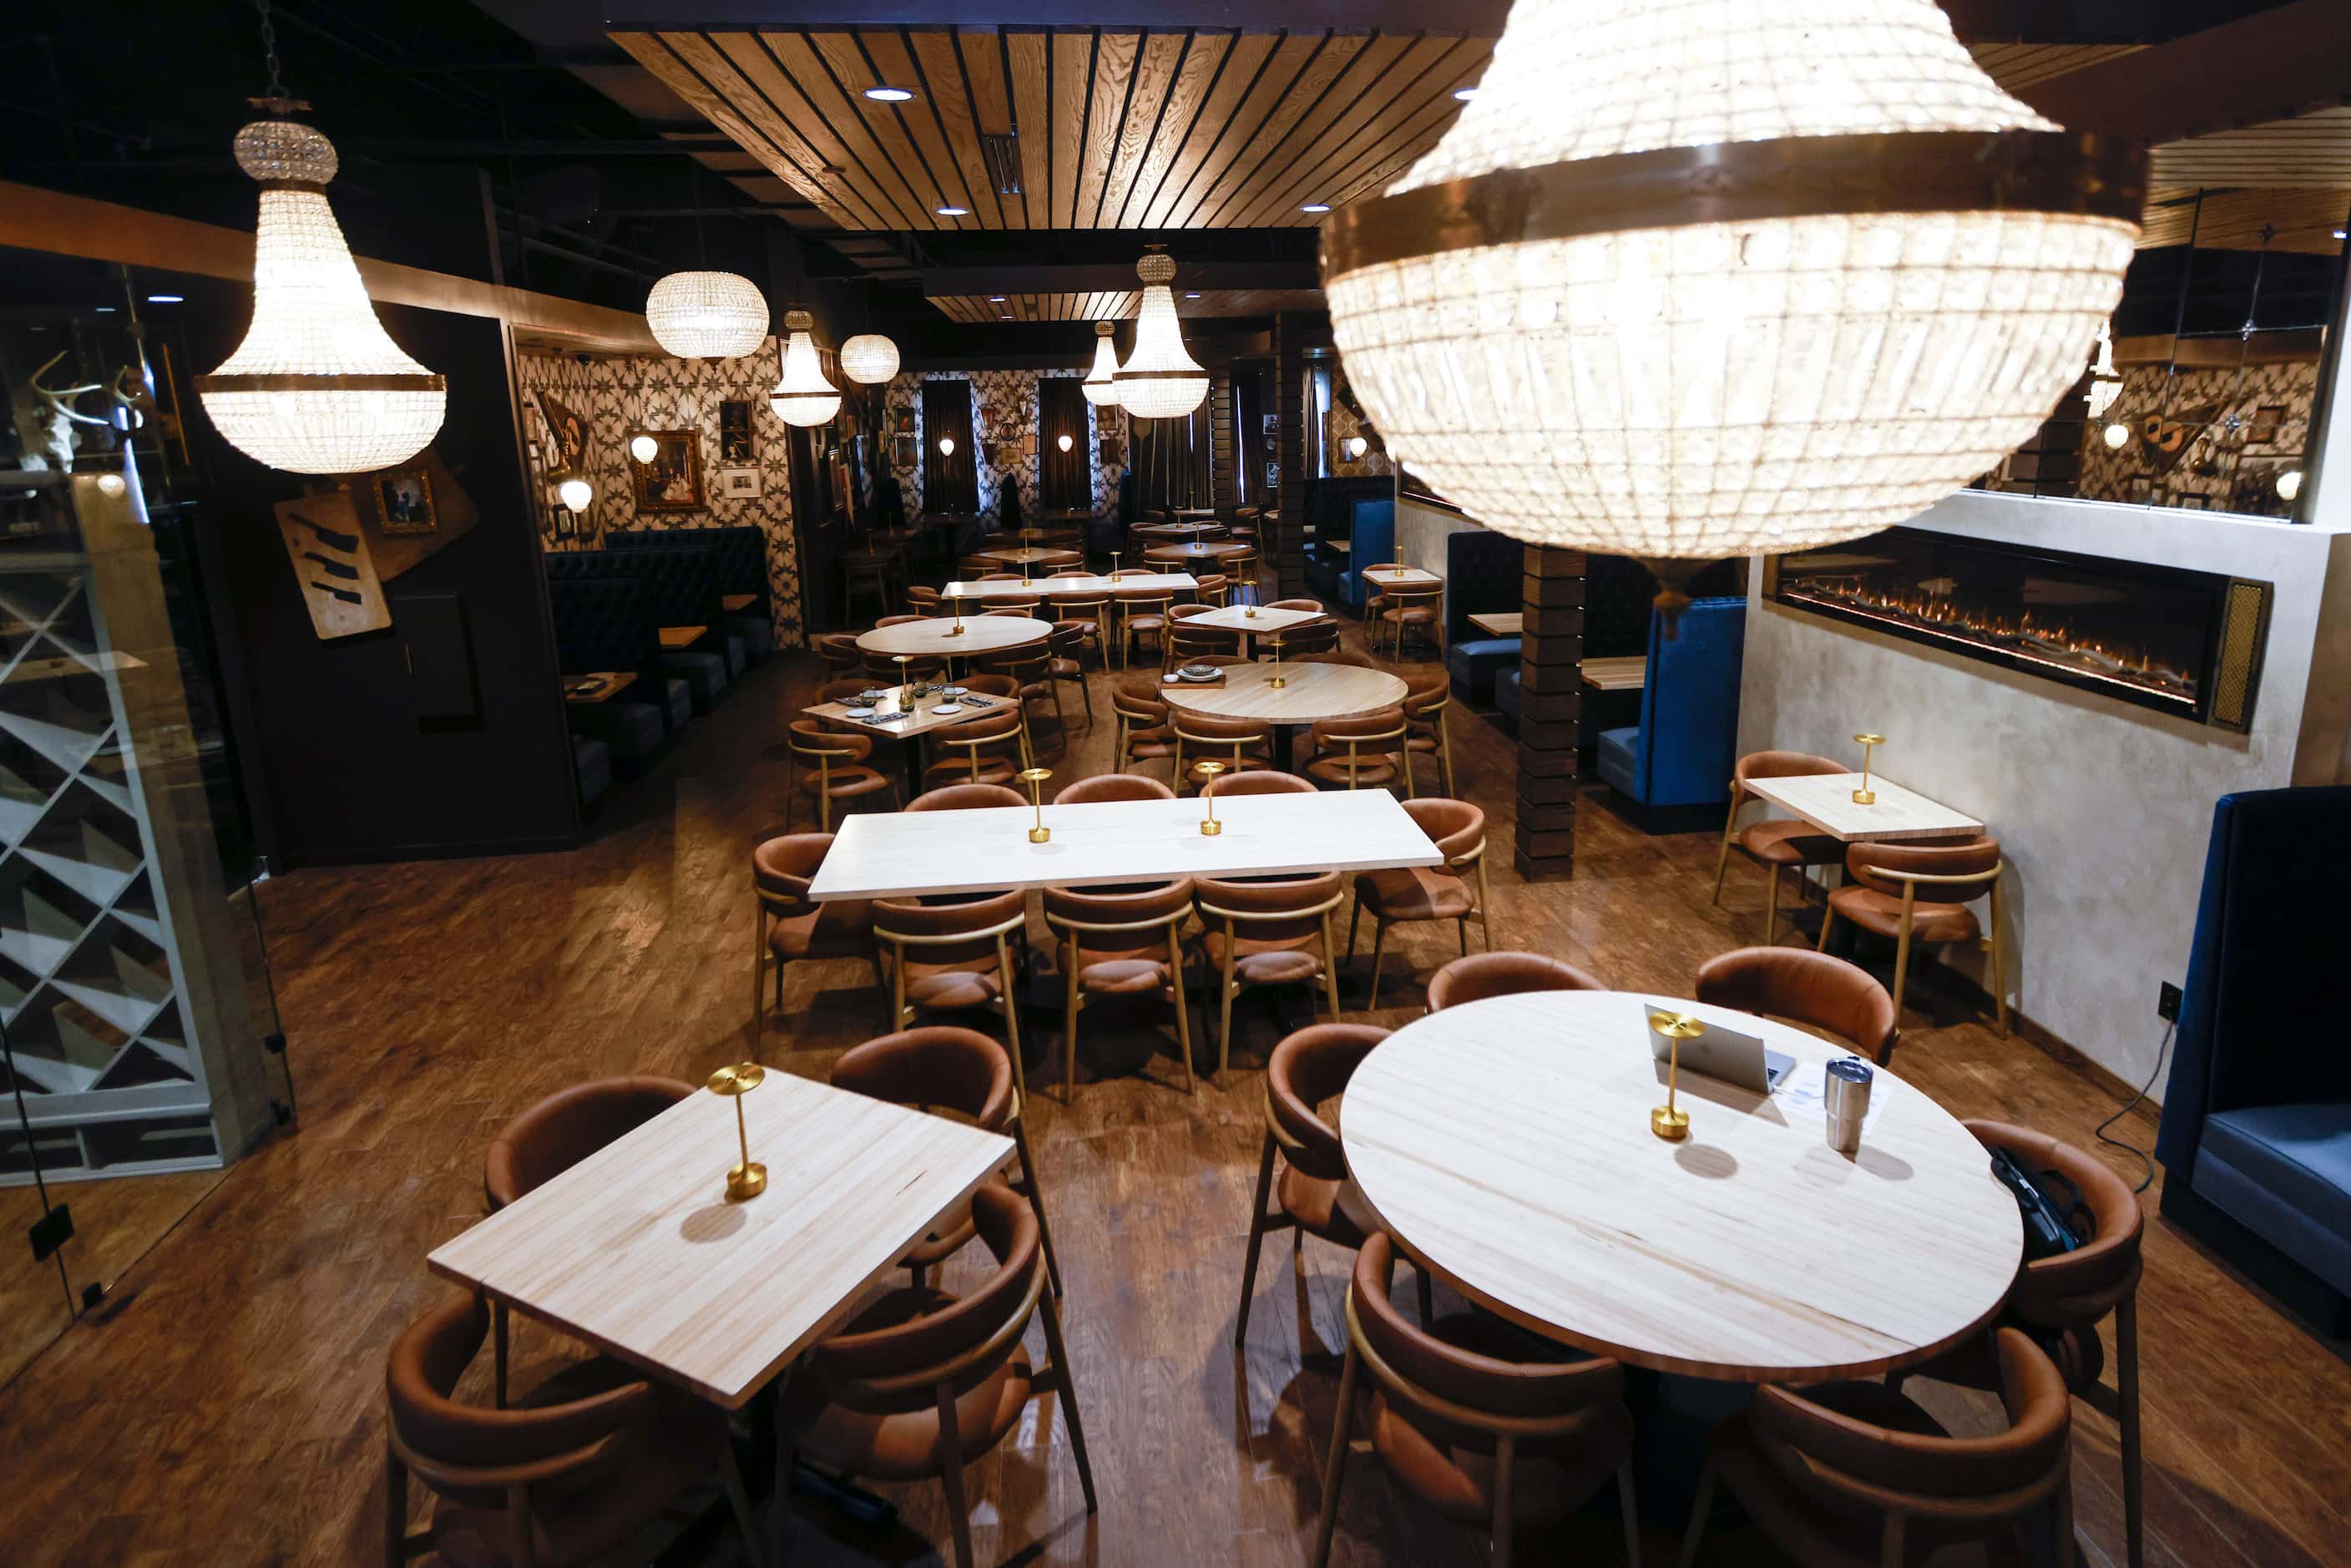 The interior of The Butcher's Cellar shows an upscale dining room with 'peculiar' design...